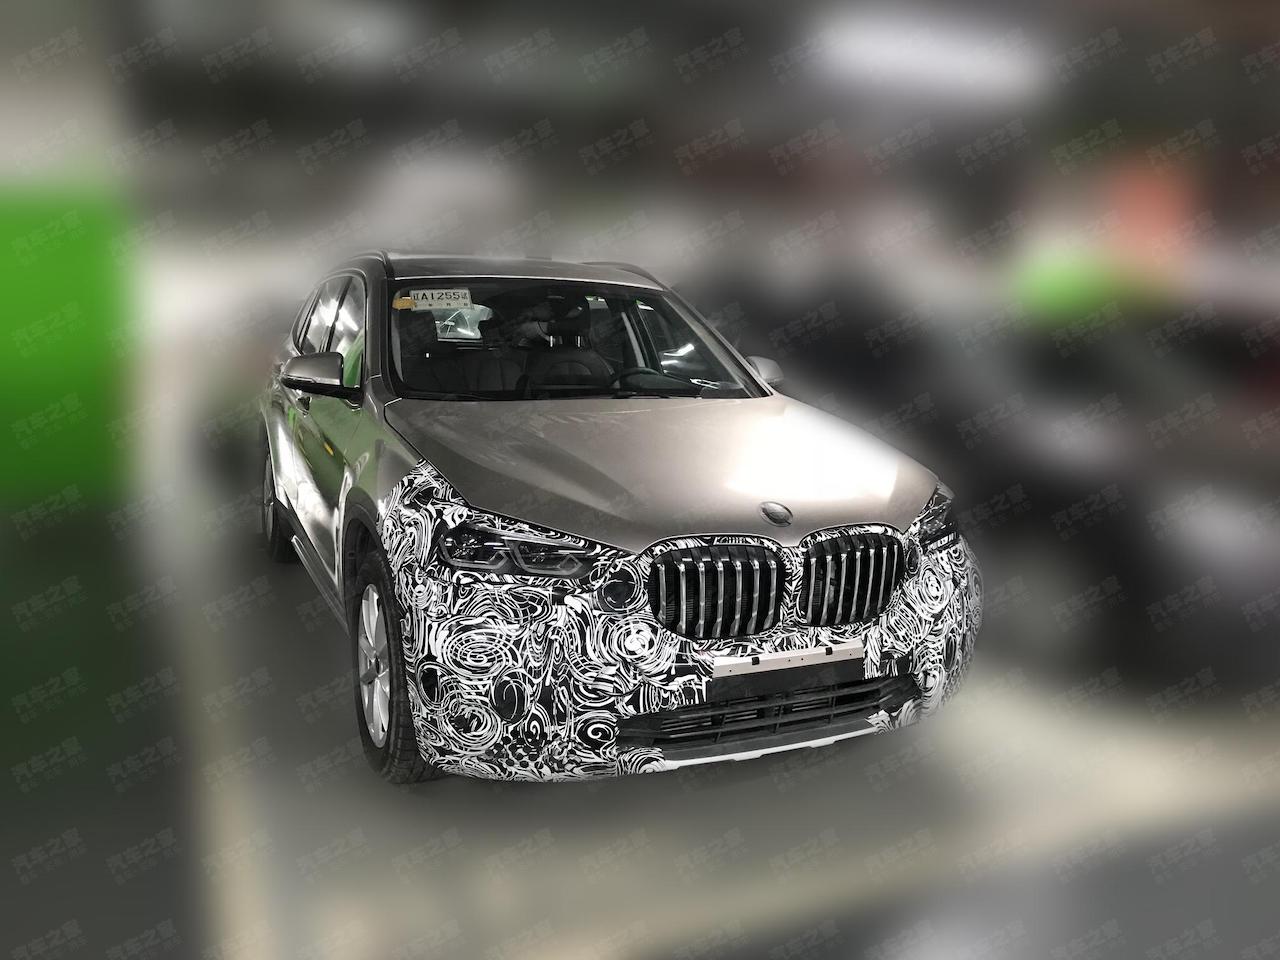 2019 Bmw X1 Facelift Spotted Up Close In China Interior